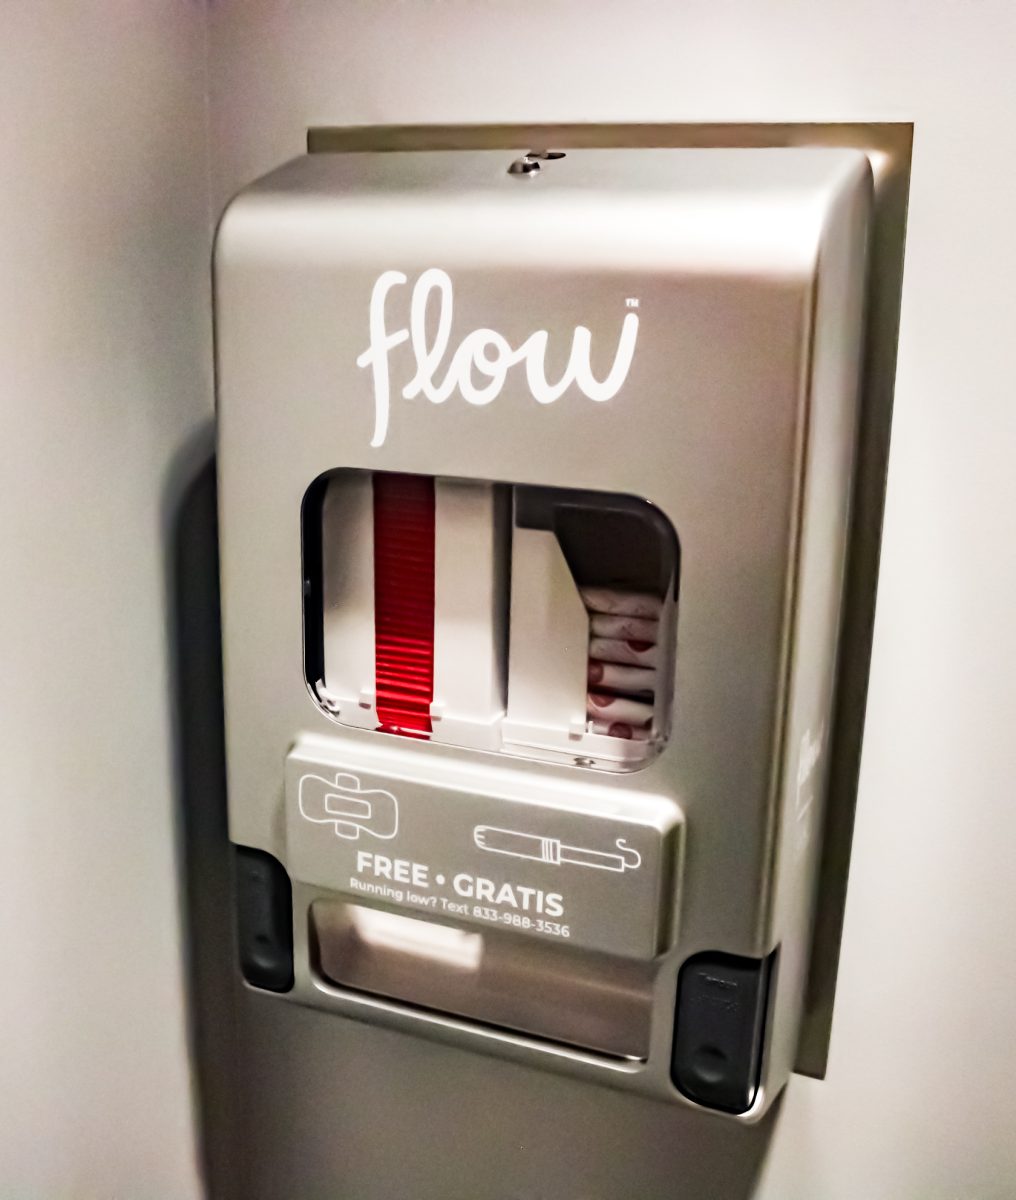 L-RAJE hopes to have tampon dispensers in all campus buildings by the end of the academic year.